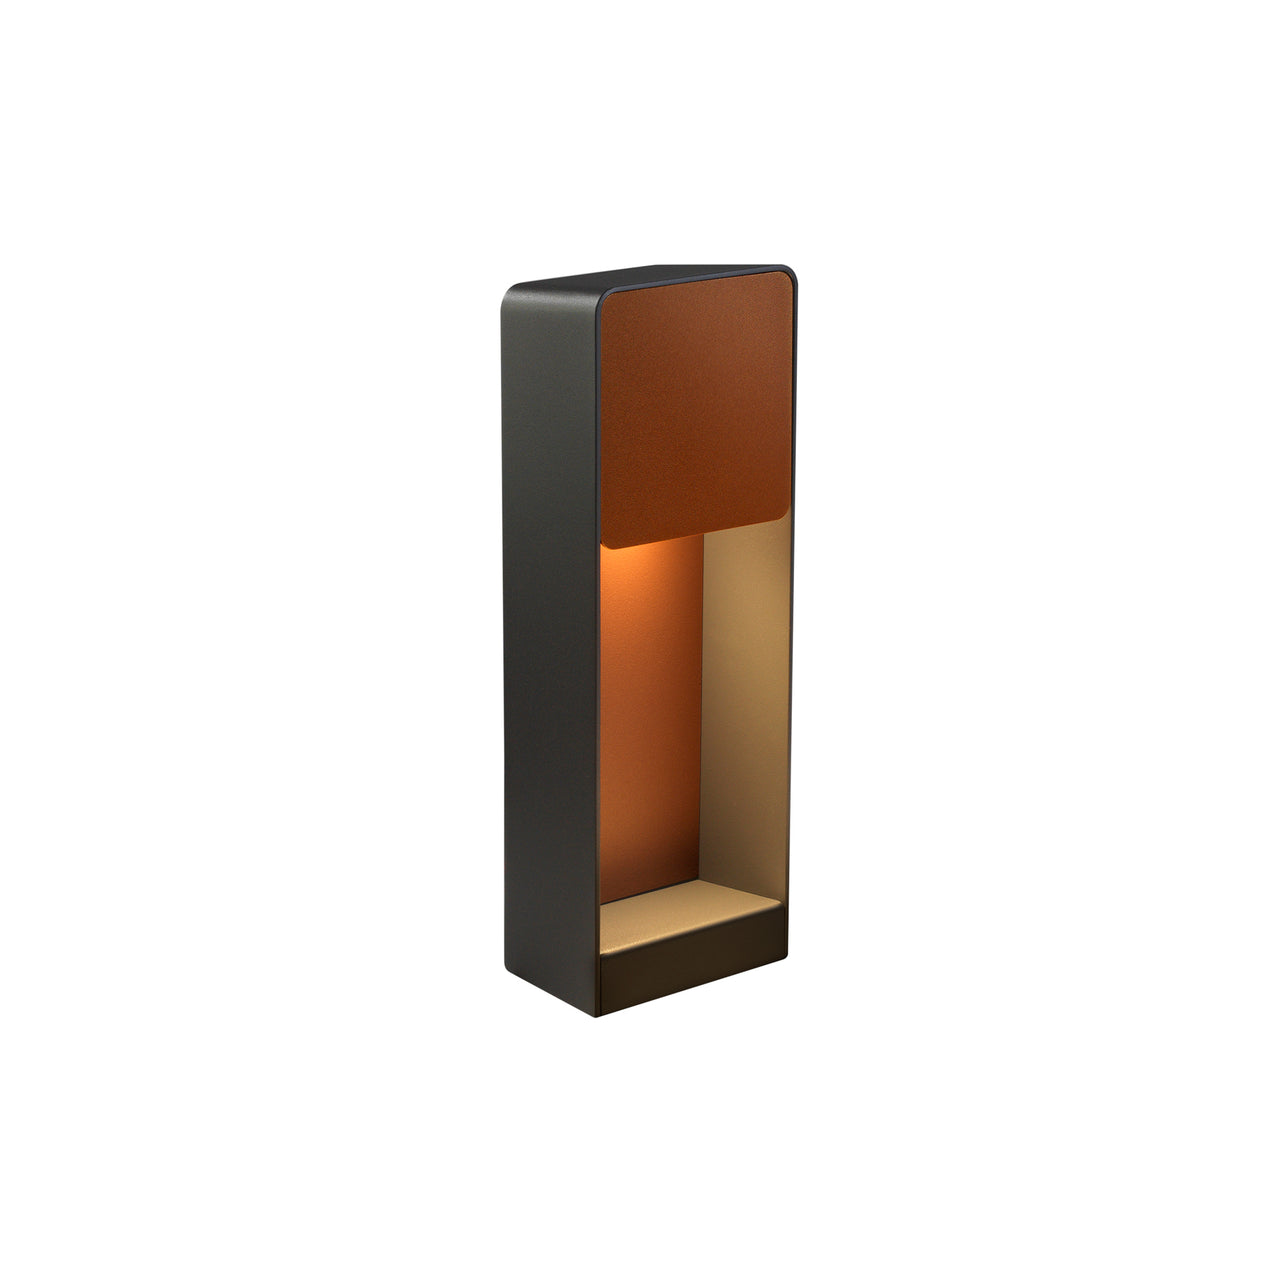 Lab A Outdoor Wall Lamp: Rust Brown